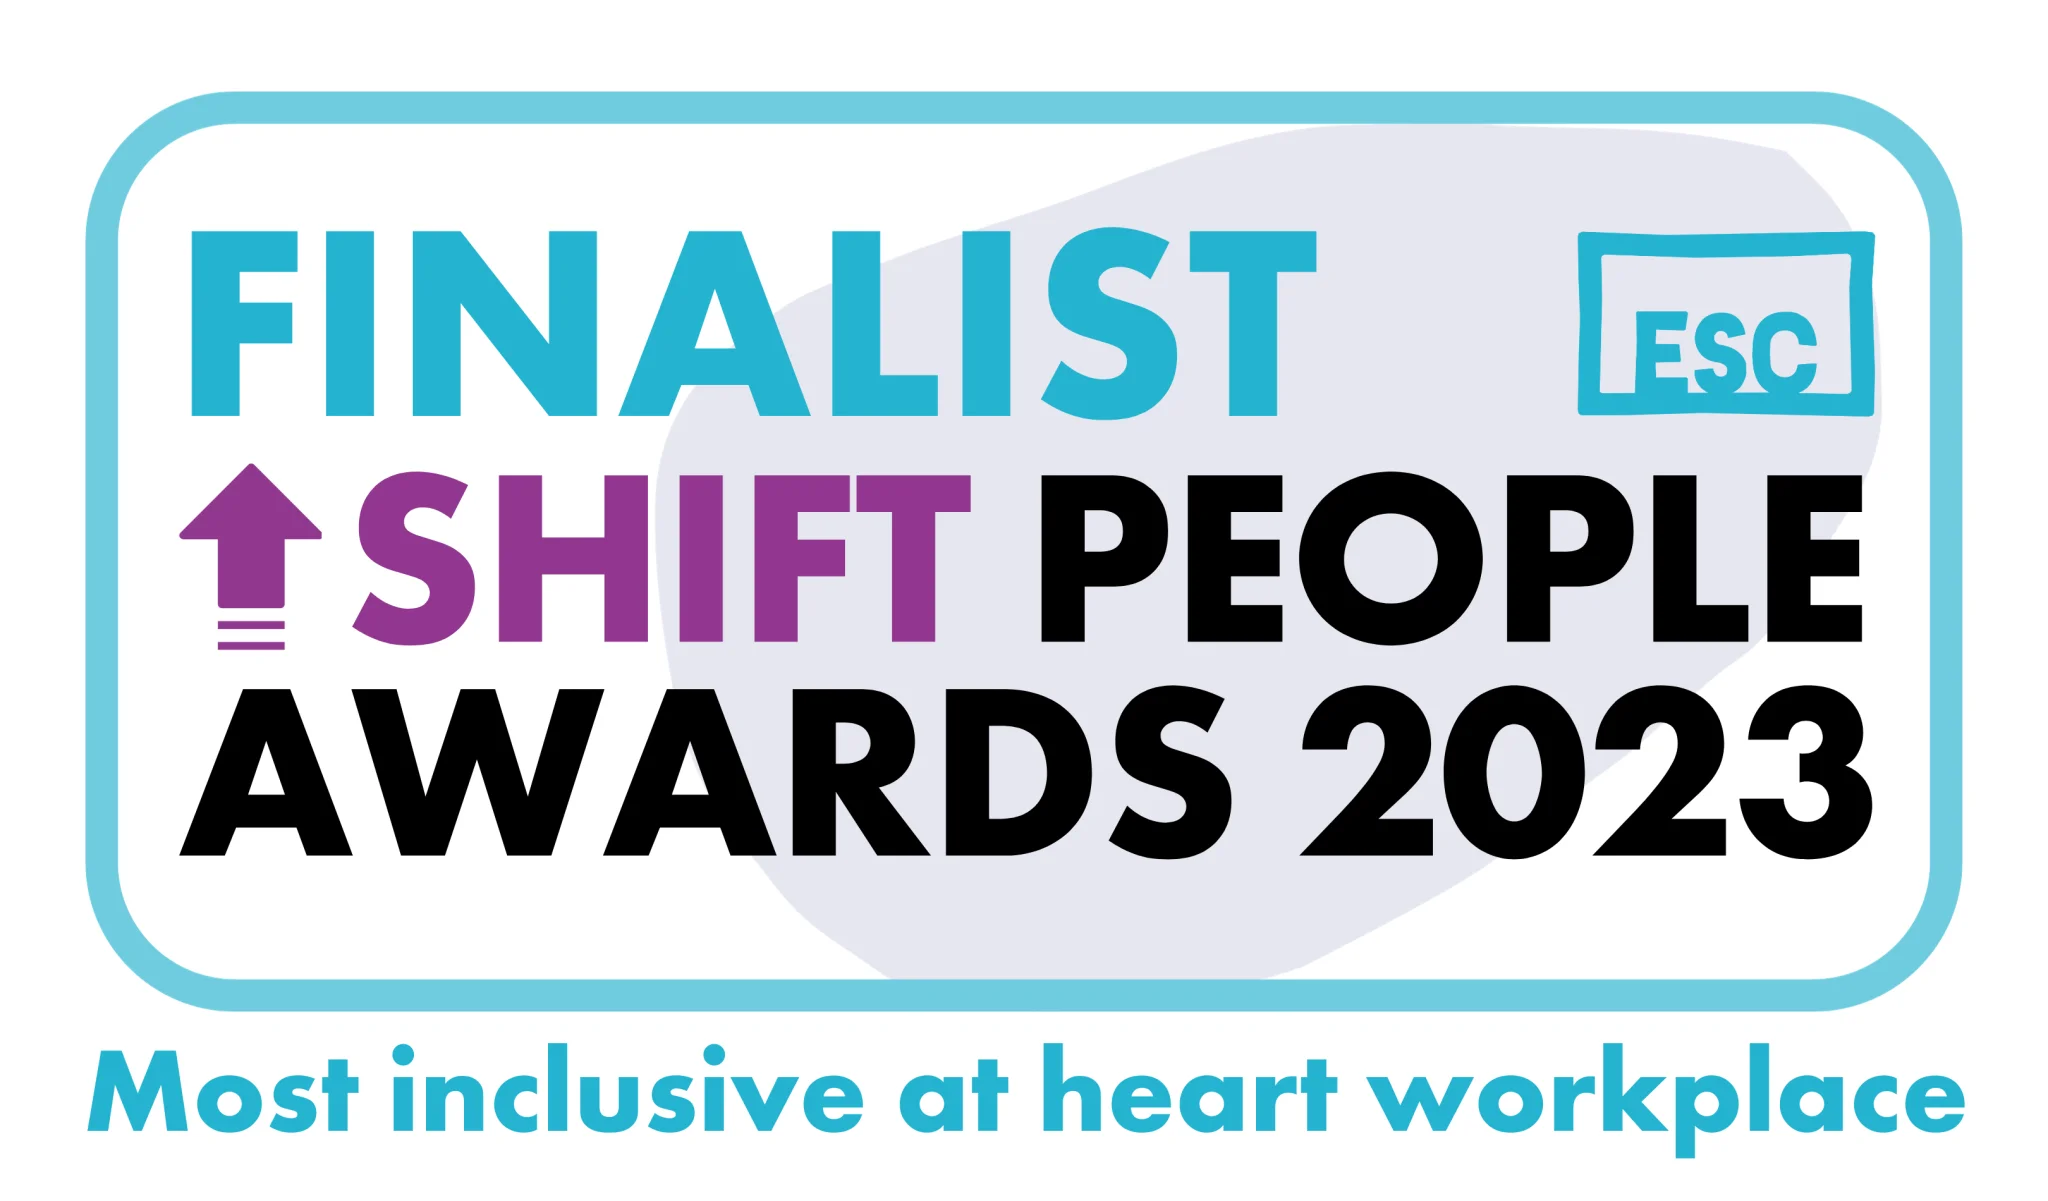 Finalist - Shift People Awards 2023 - Most inclusive at heart workplace